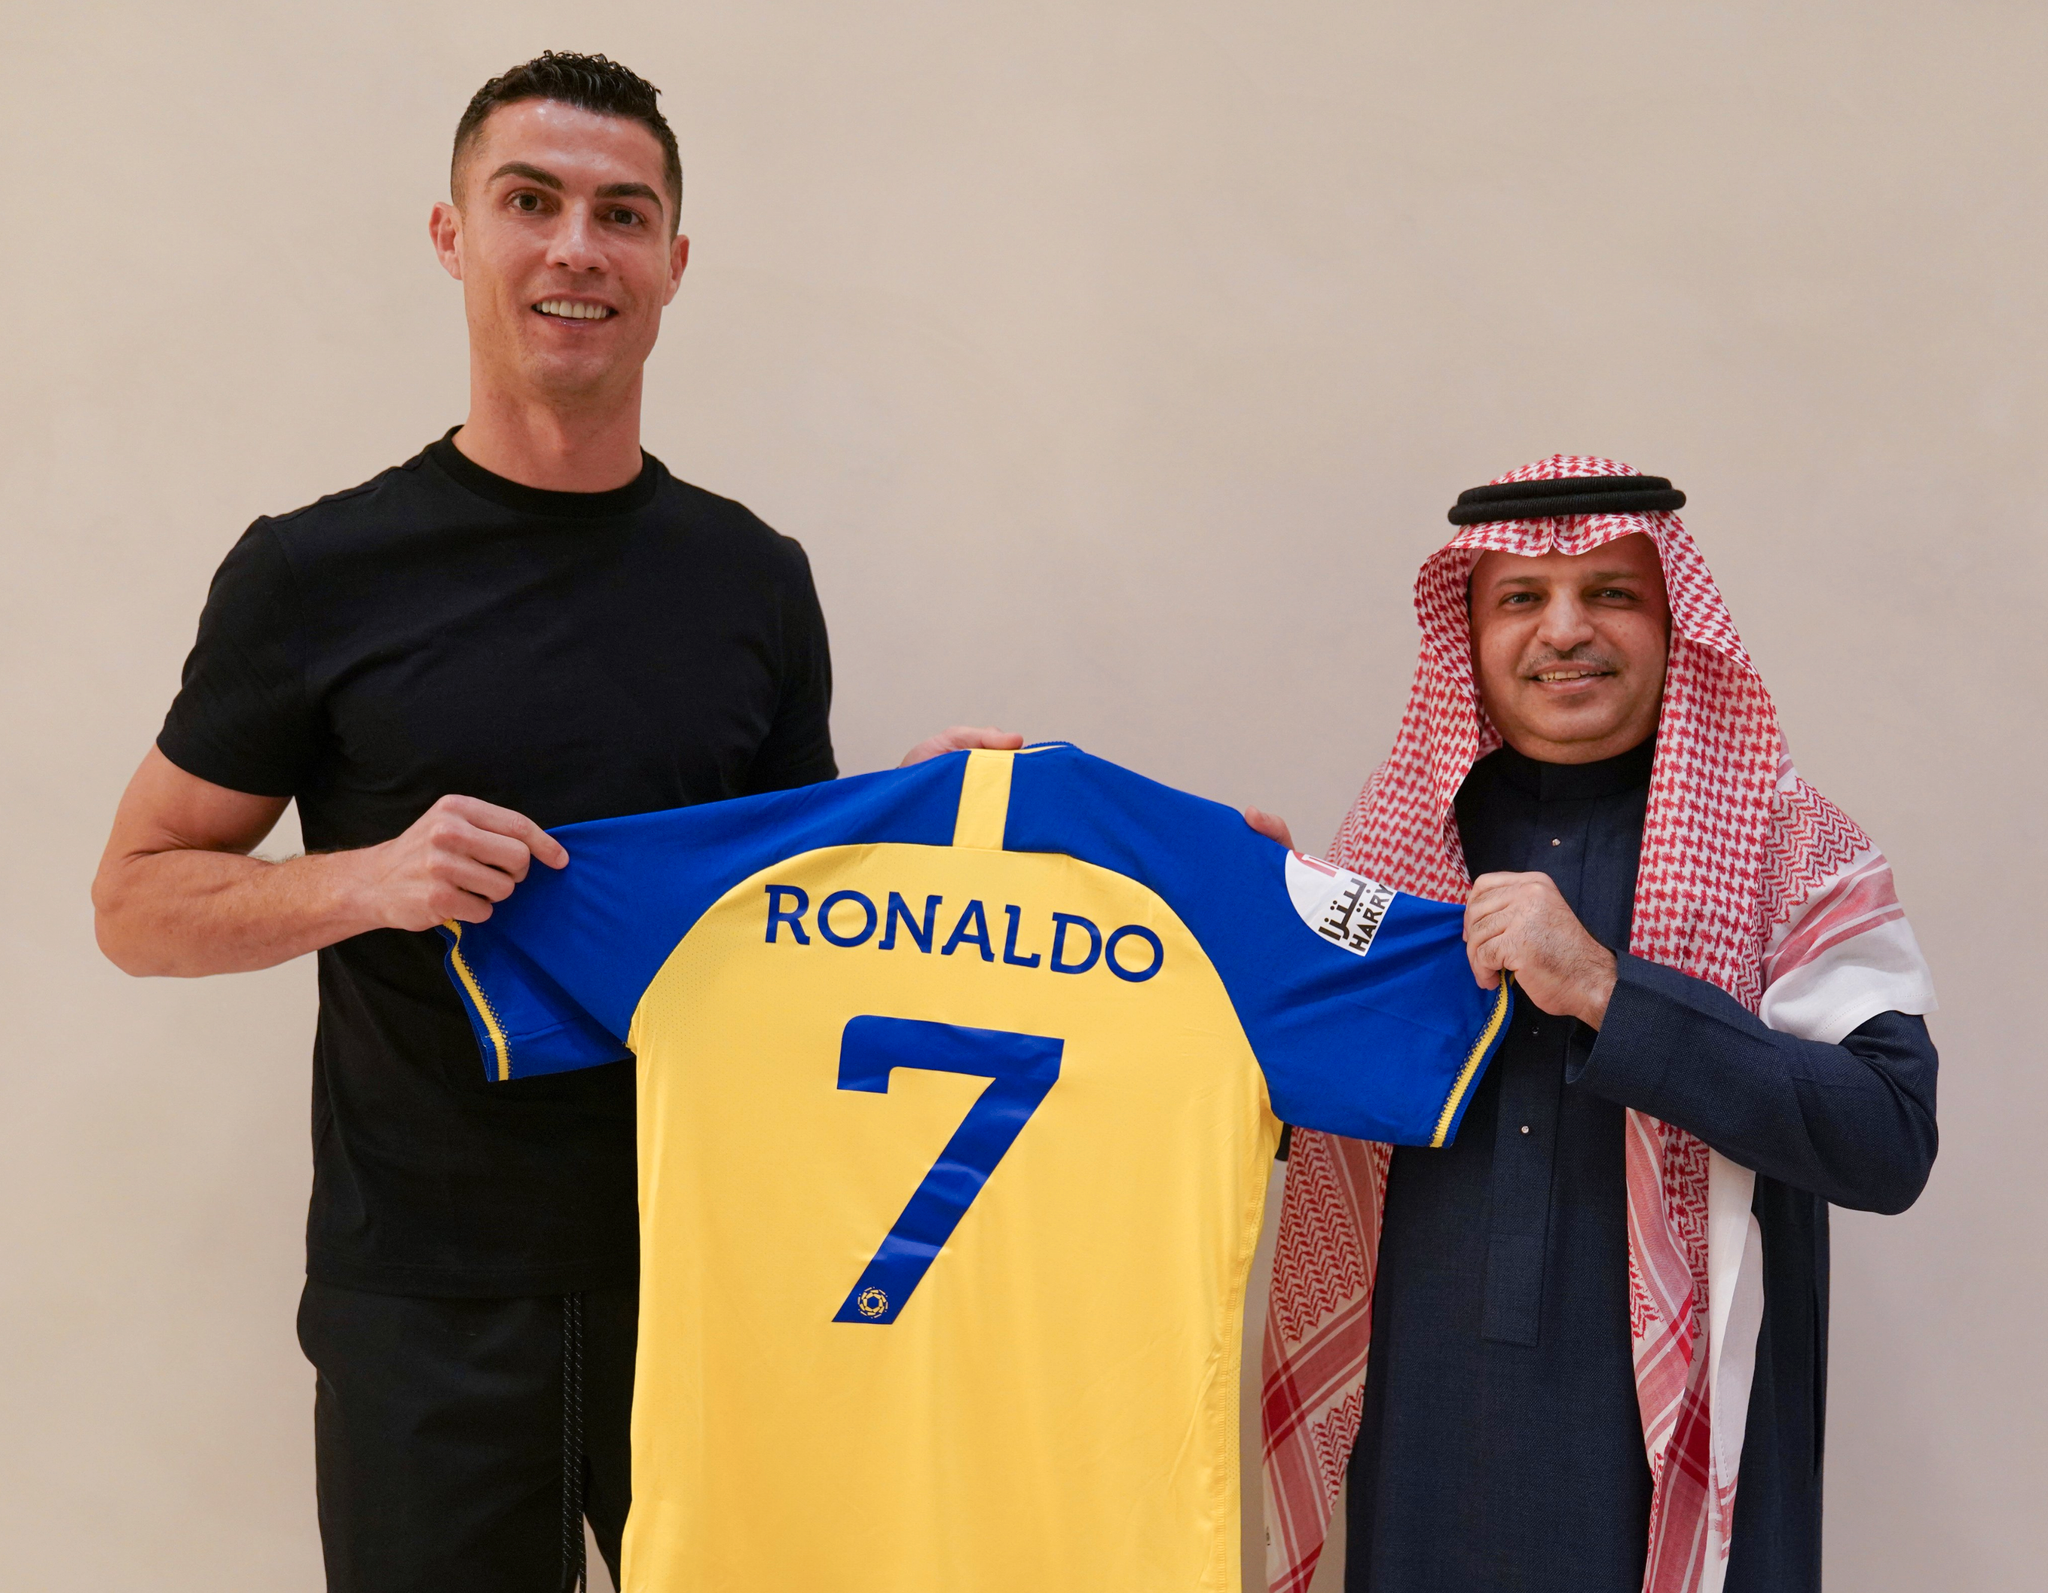 Ronaldo has signed a contract with Al-Nassr